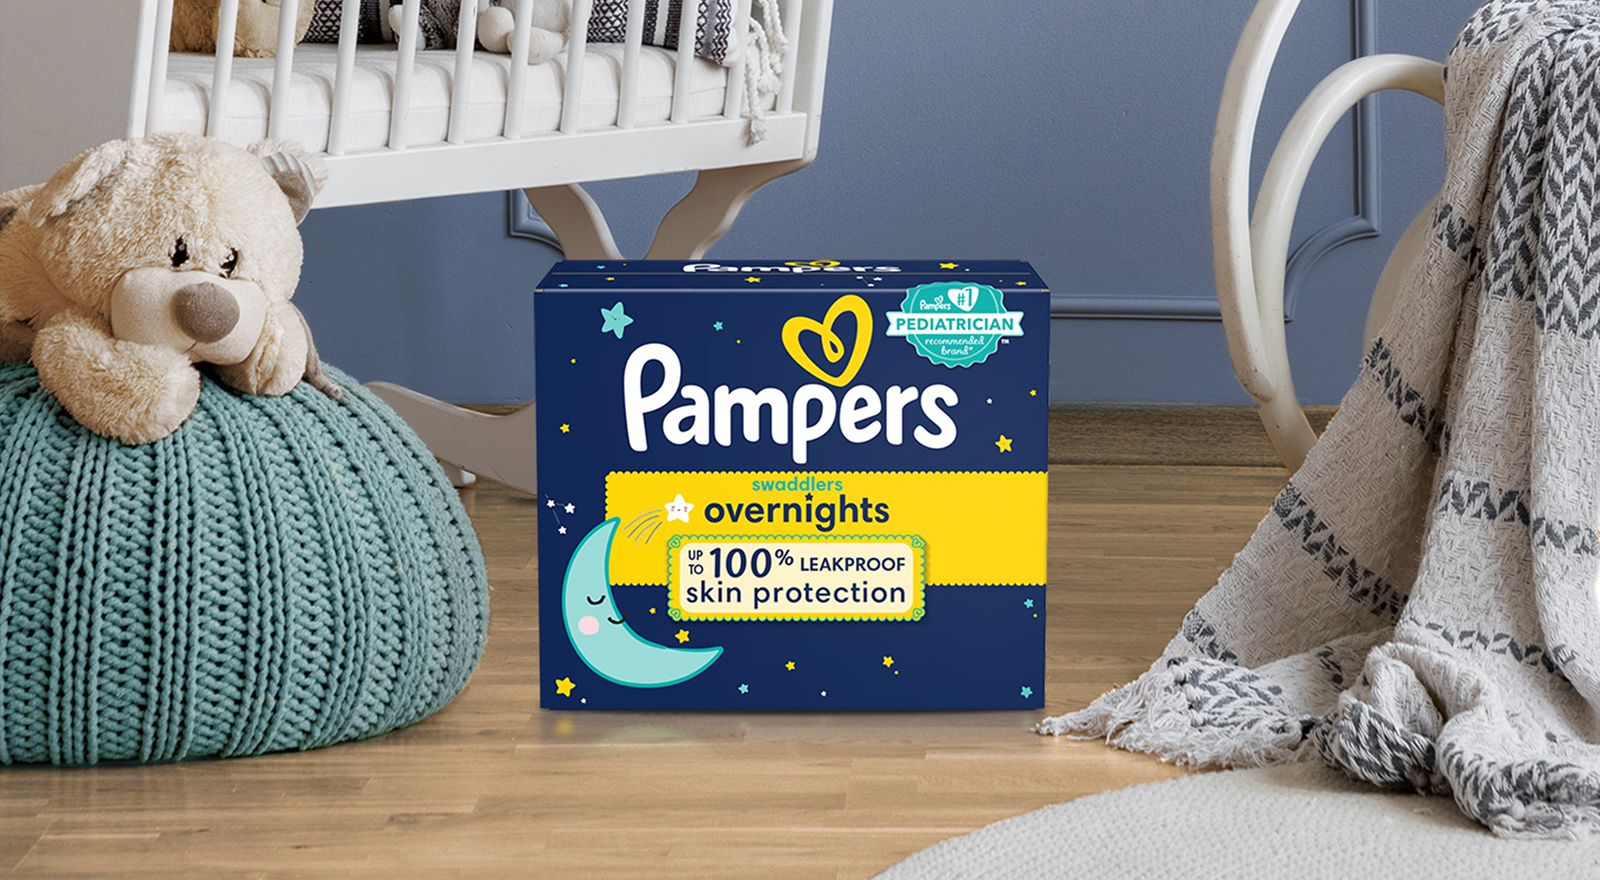 Pampers Swaddlers Overnight Diapers - Size 7 36 ct